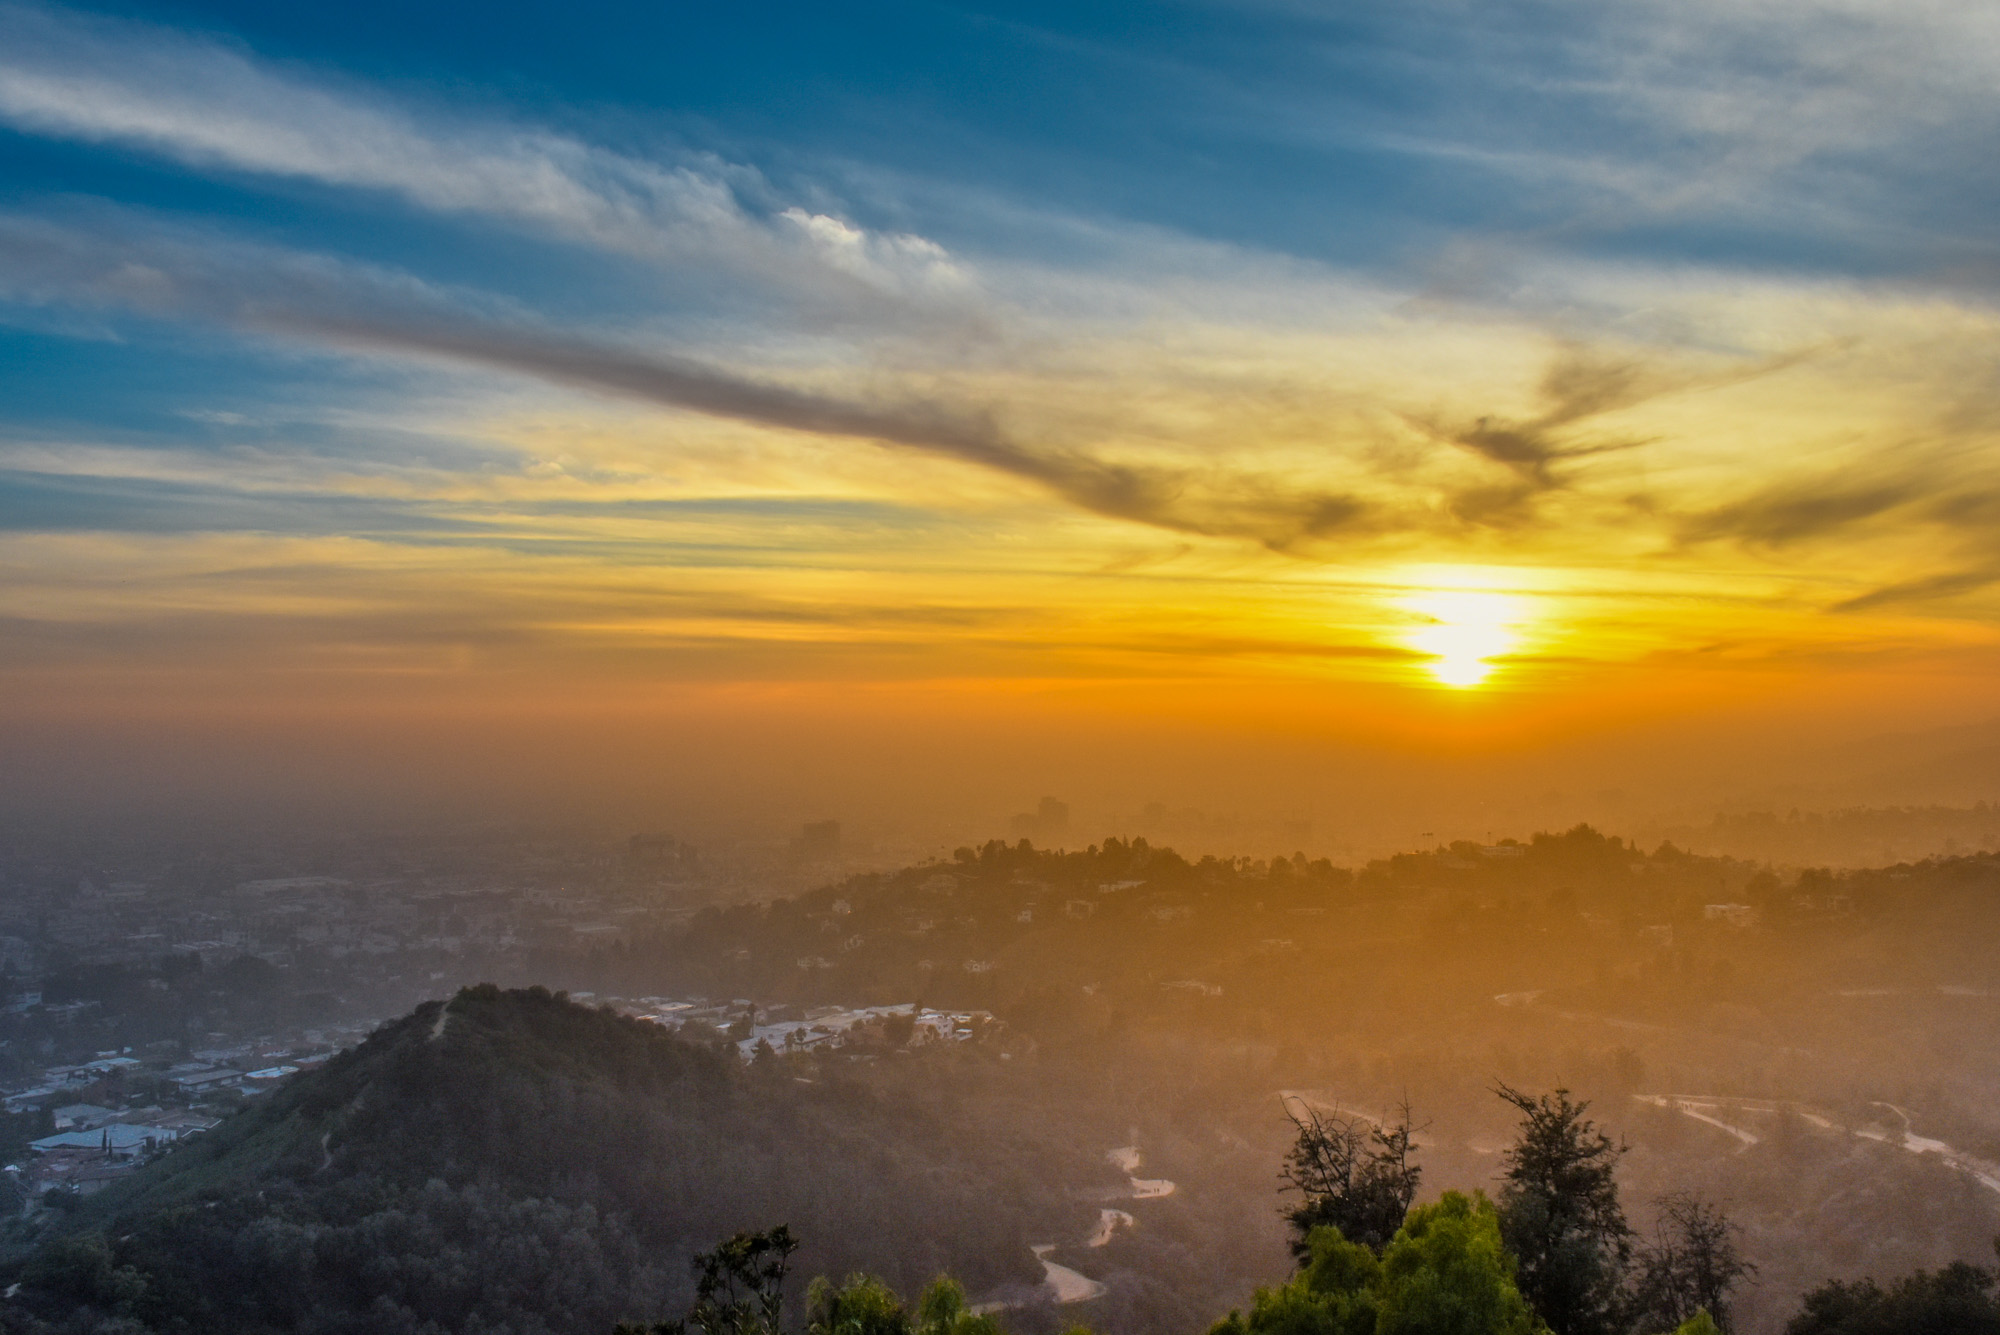 Sunset over LA from Griffith Observatory